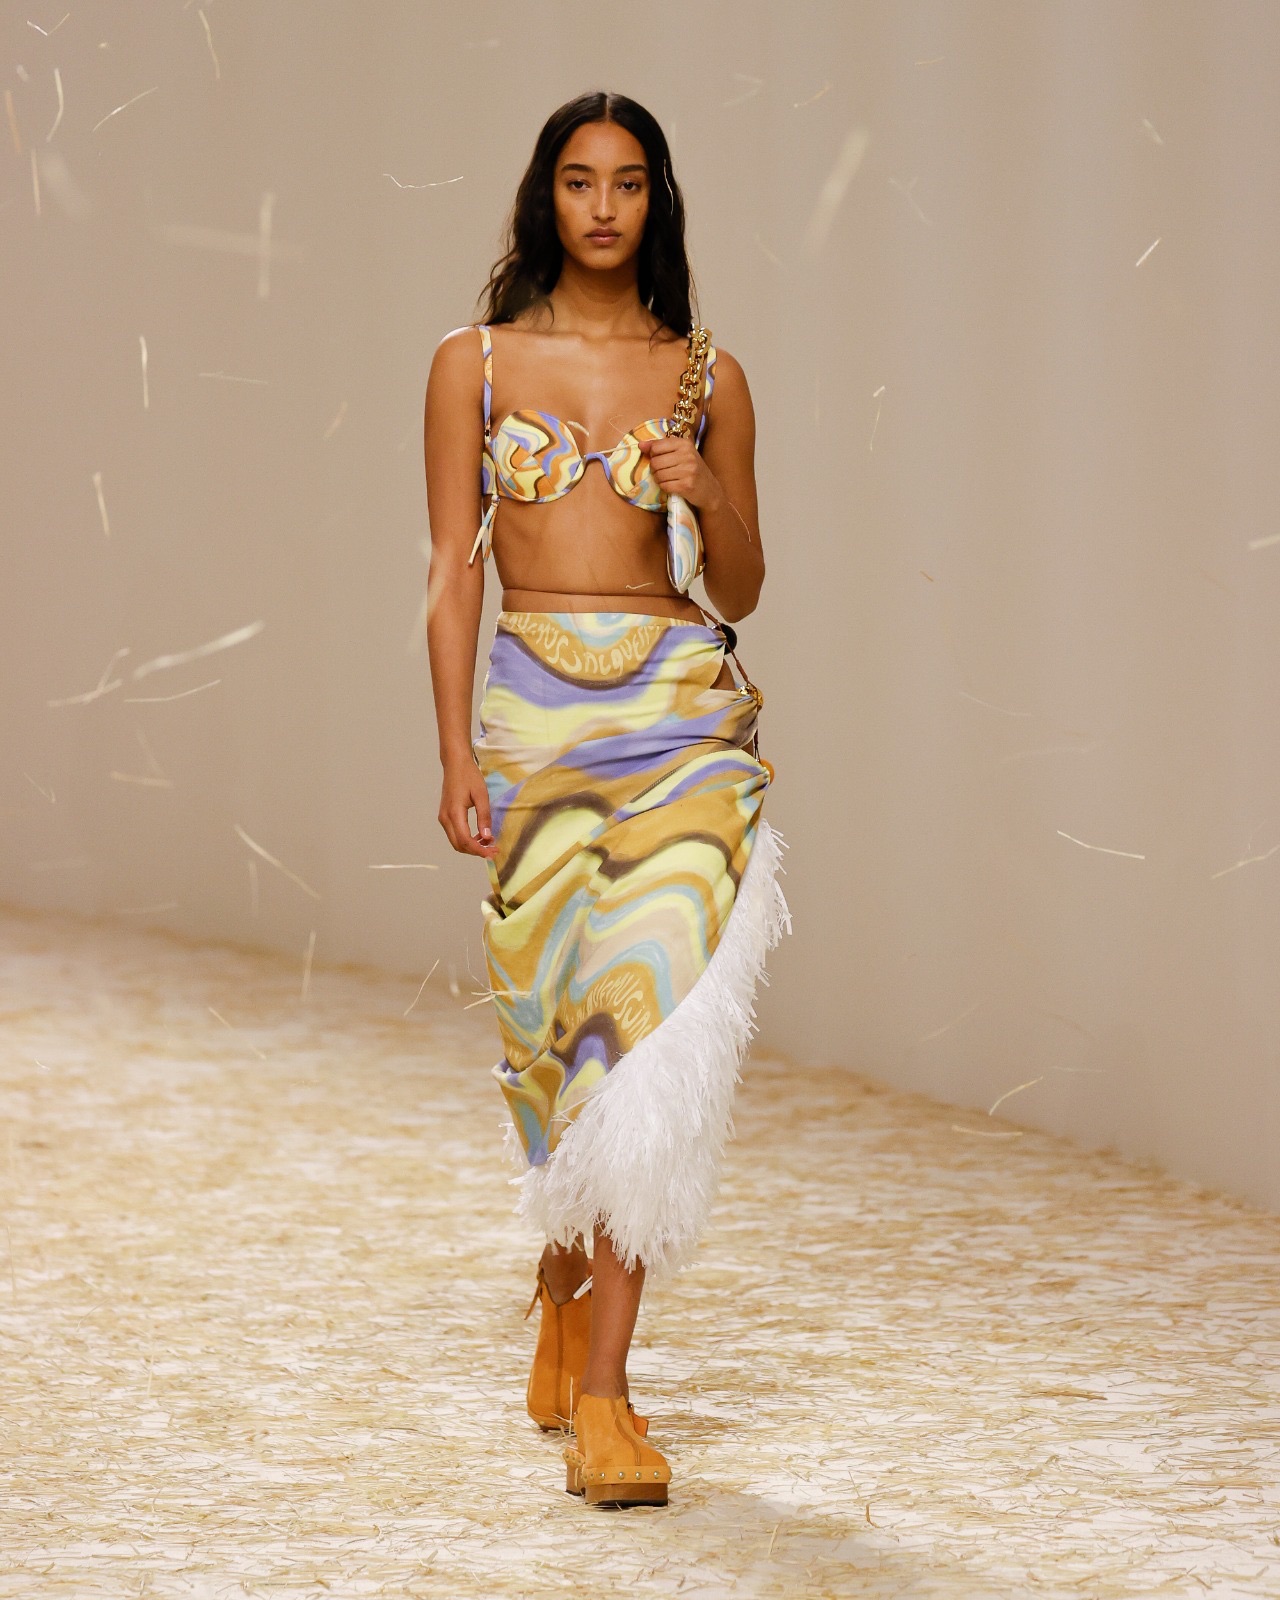 Data analysis shows Jacquemus as fashion's top breakout brand